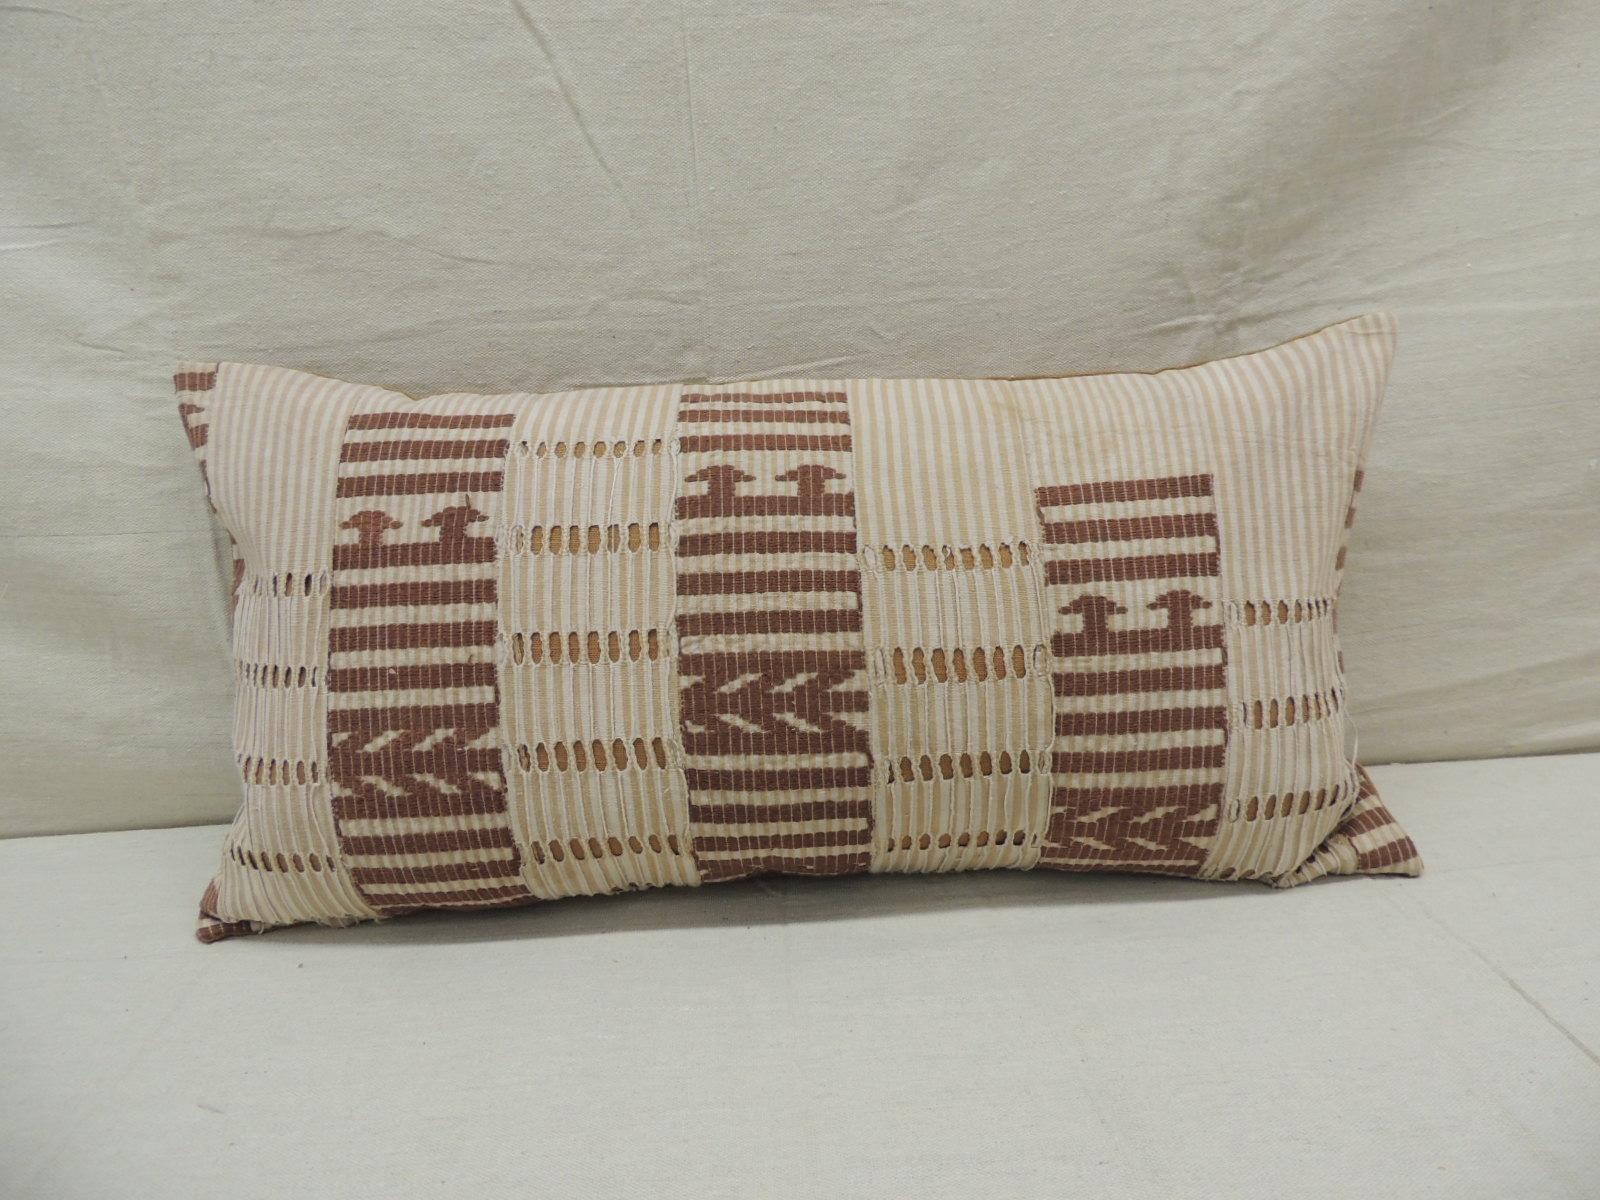 Vintage tan and brown woven ewe stripweaves African bolster decorative pillow
with yellow linen backing.
Decorative pillow handcrafted and designed in the USA.
Closure by stitch (no zipper closure) with custom made pillow insert.
Size: 25